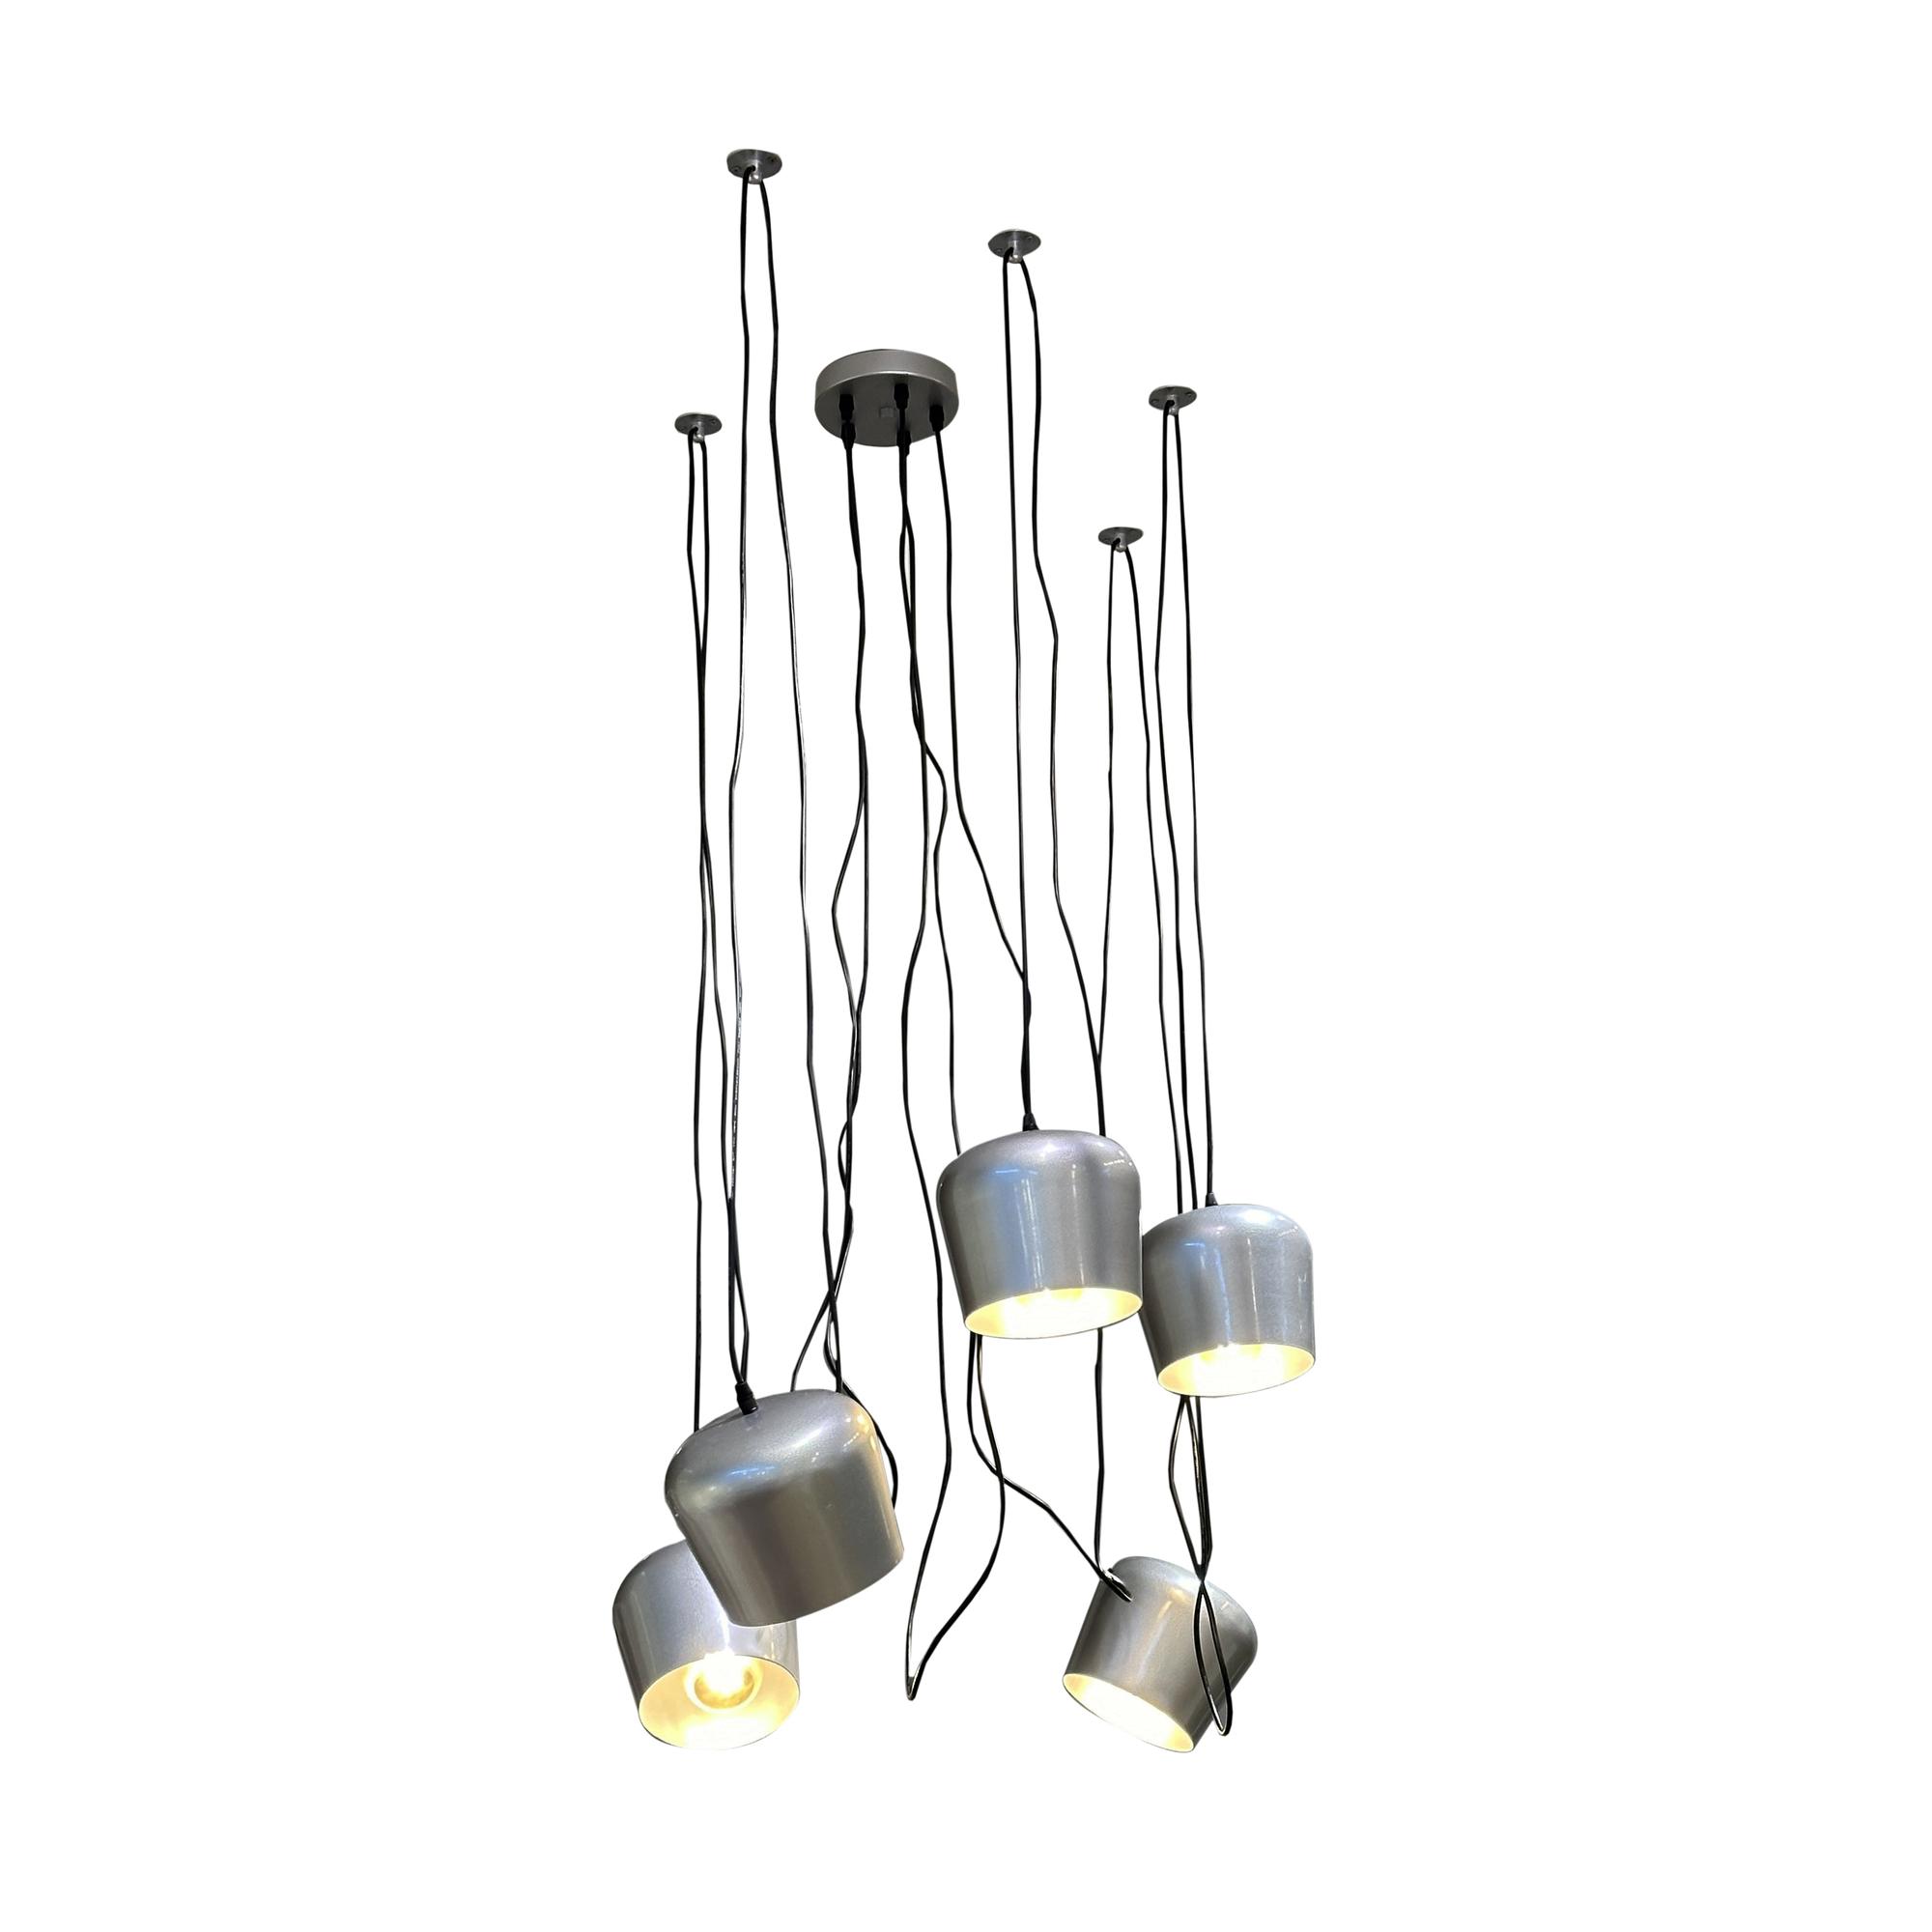 CEILING LAMP WITH LIGHT 18X18X1 - 541-670022